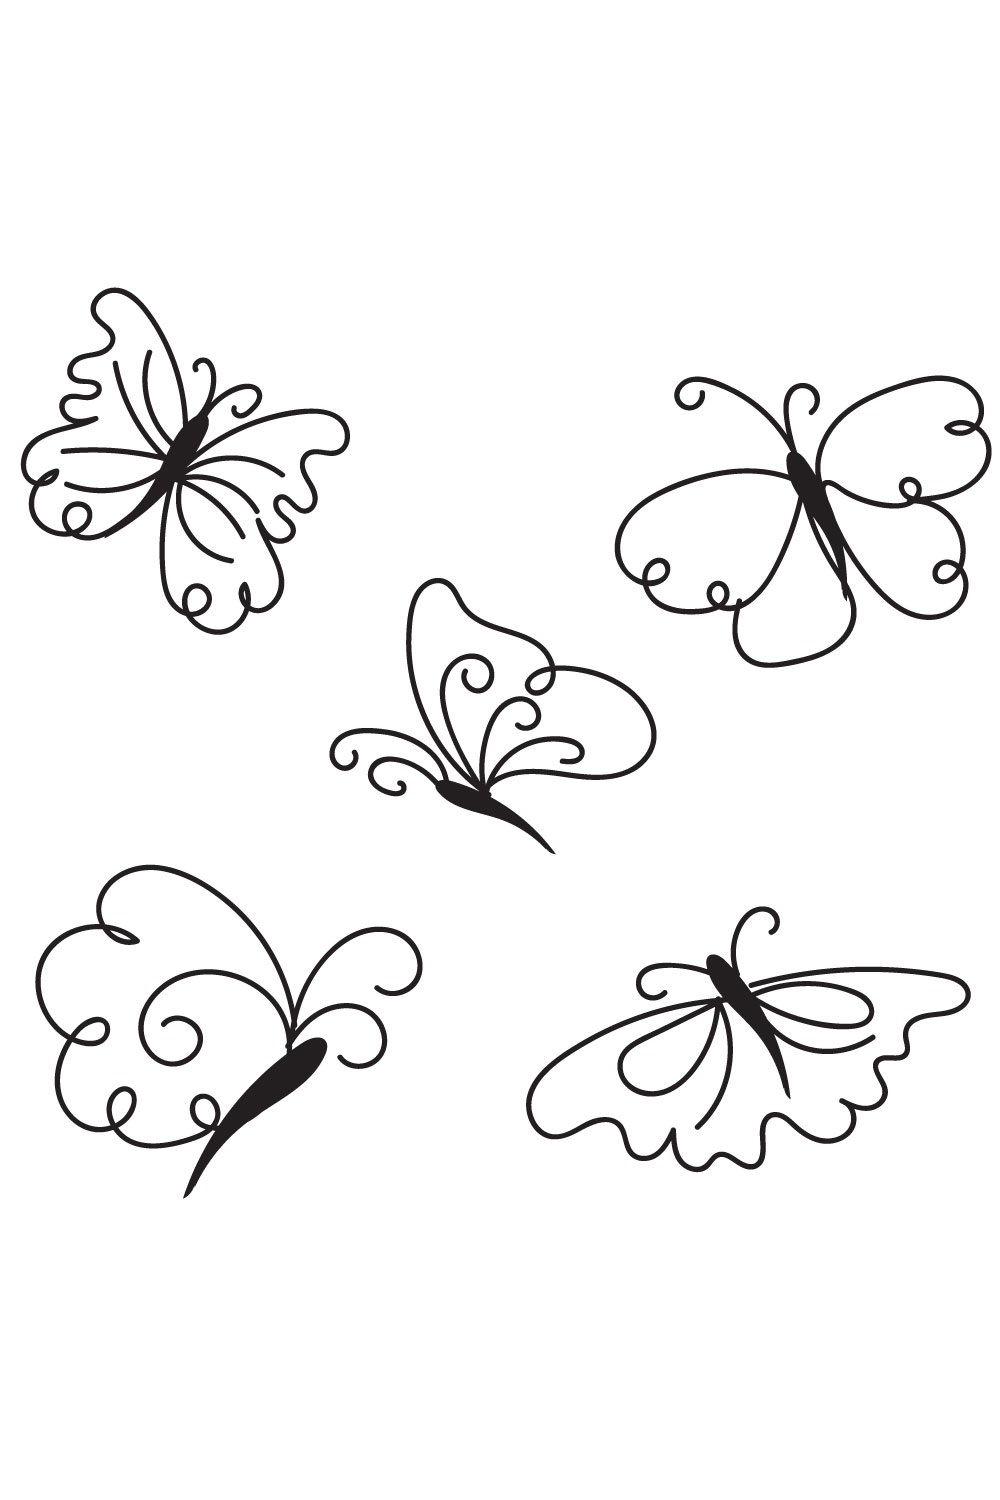 Set of four butterflies flying in the air.